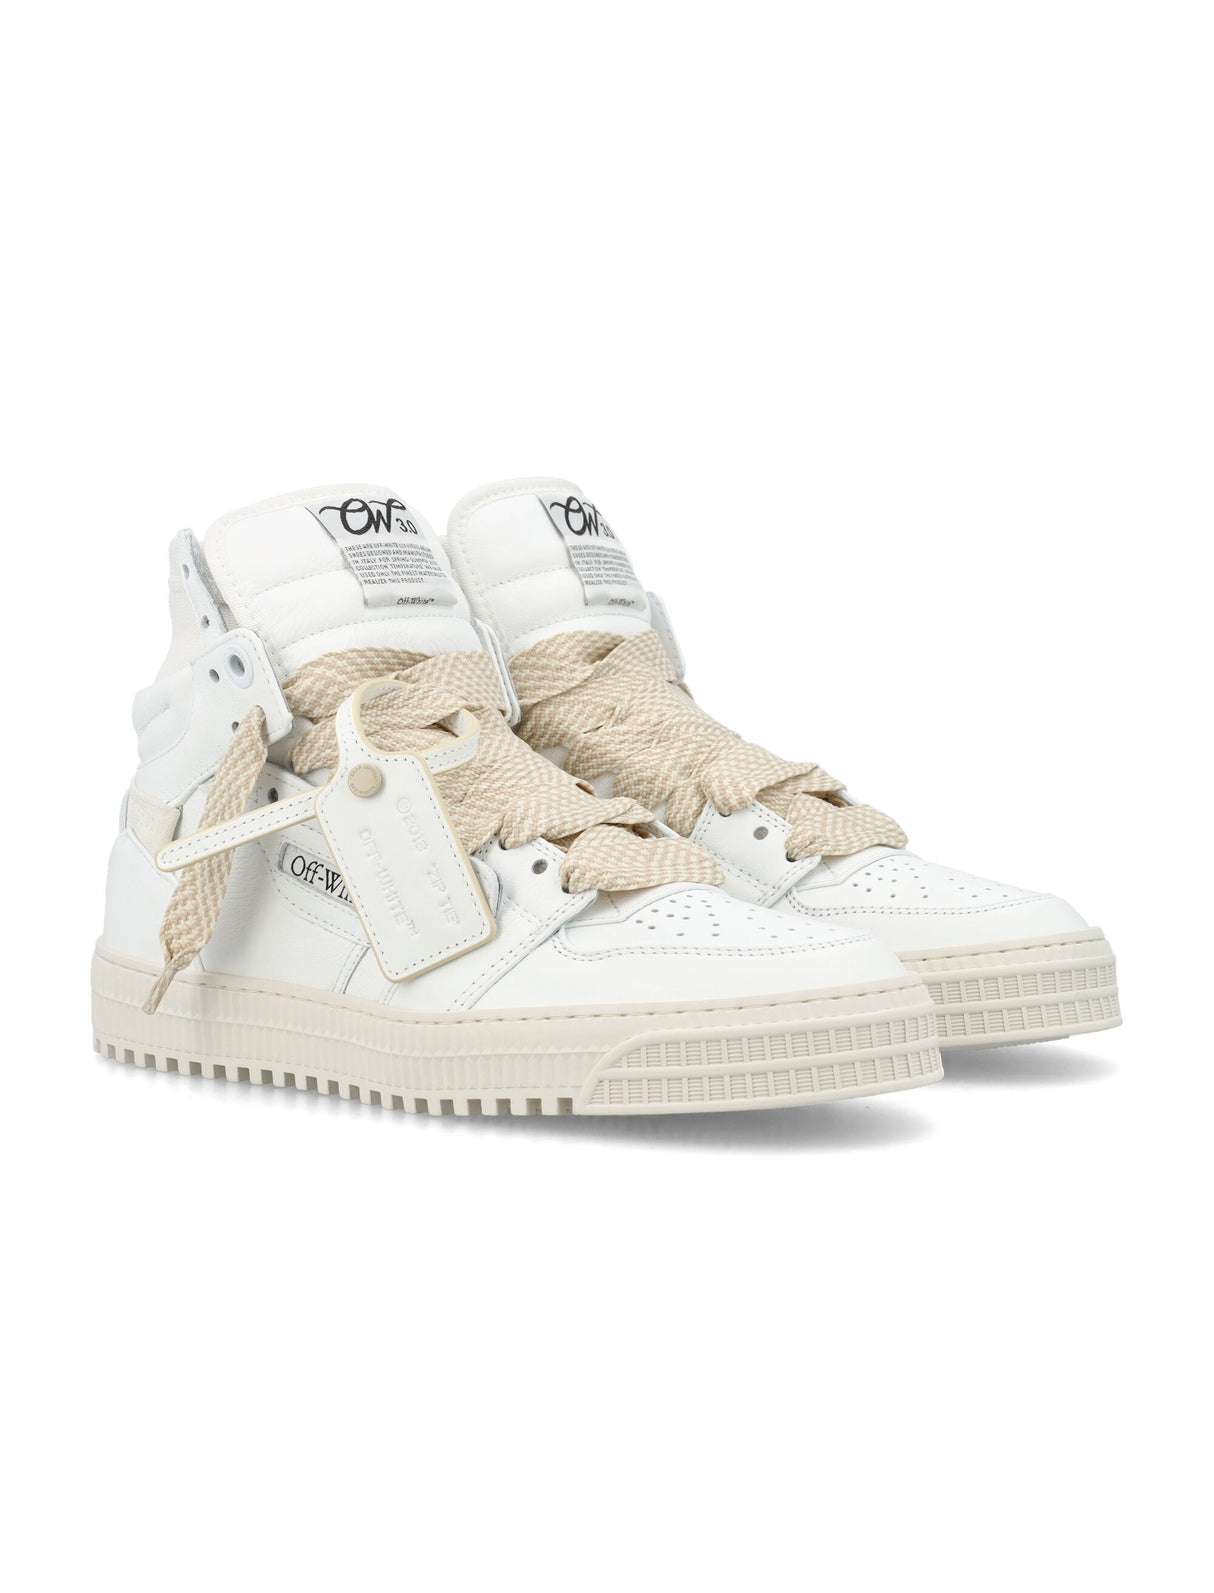 Men's High-Top White and Beige Sneakers with OFF-WHITE Logo